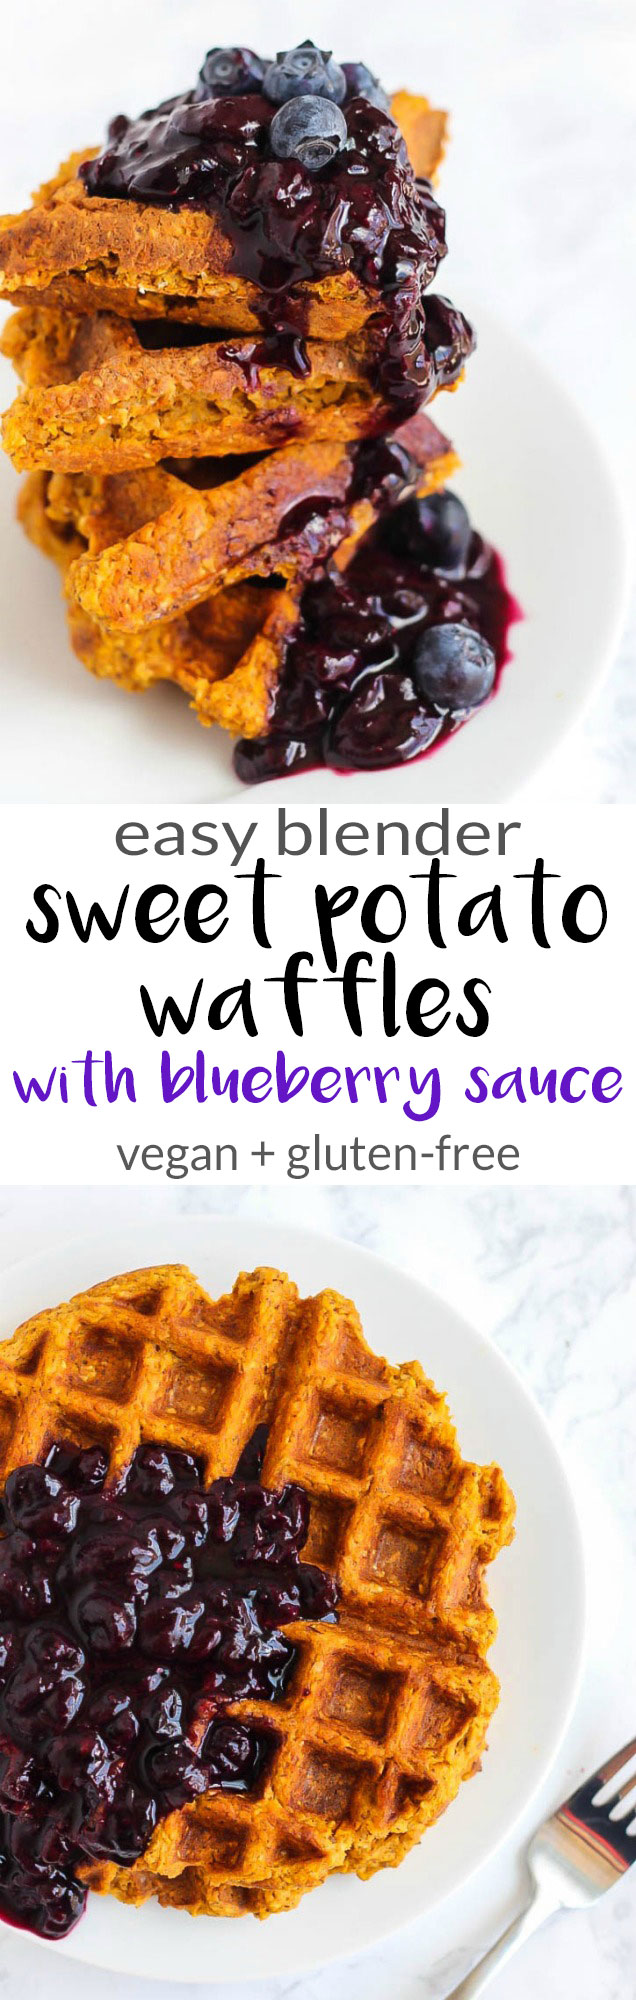 Add some vegetables to your breakfast routine with these decadent Sweet Potato Waffles with Blueberry Sauce! Vegan, gluten-free, and made in the blender.